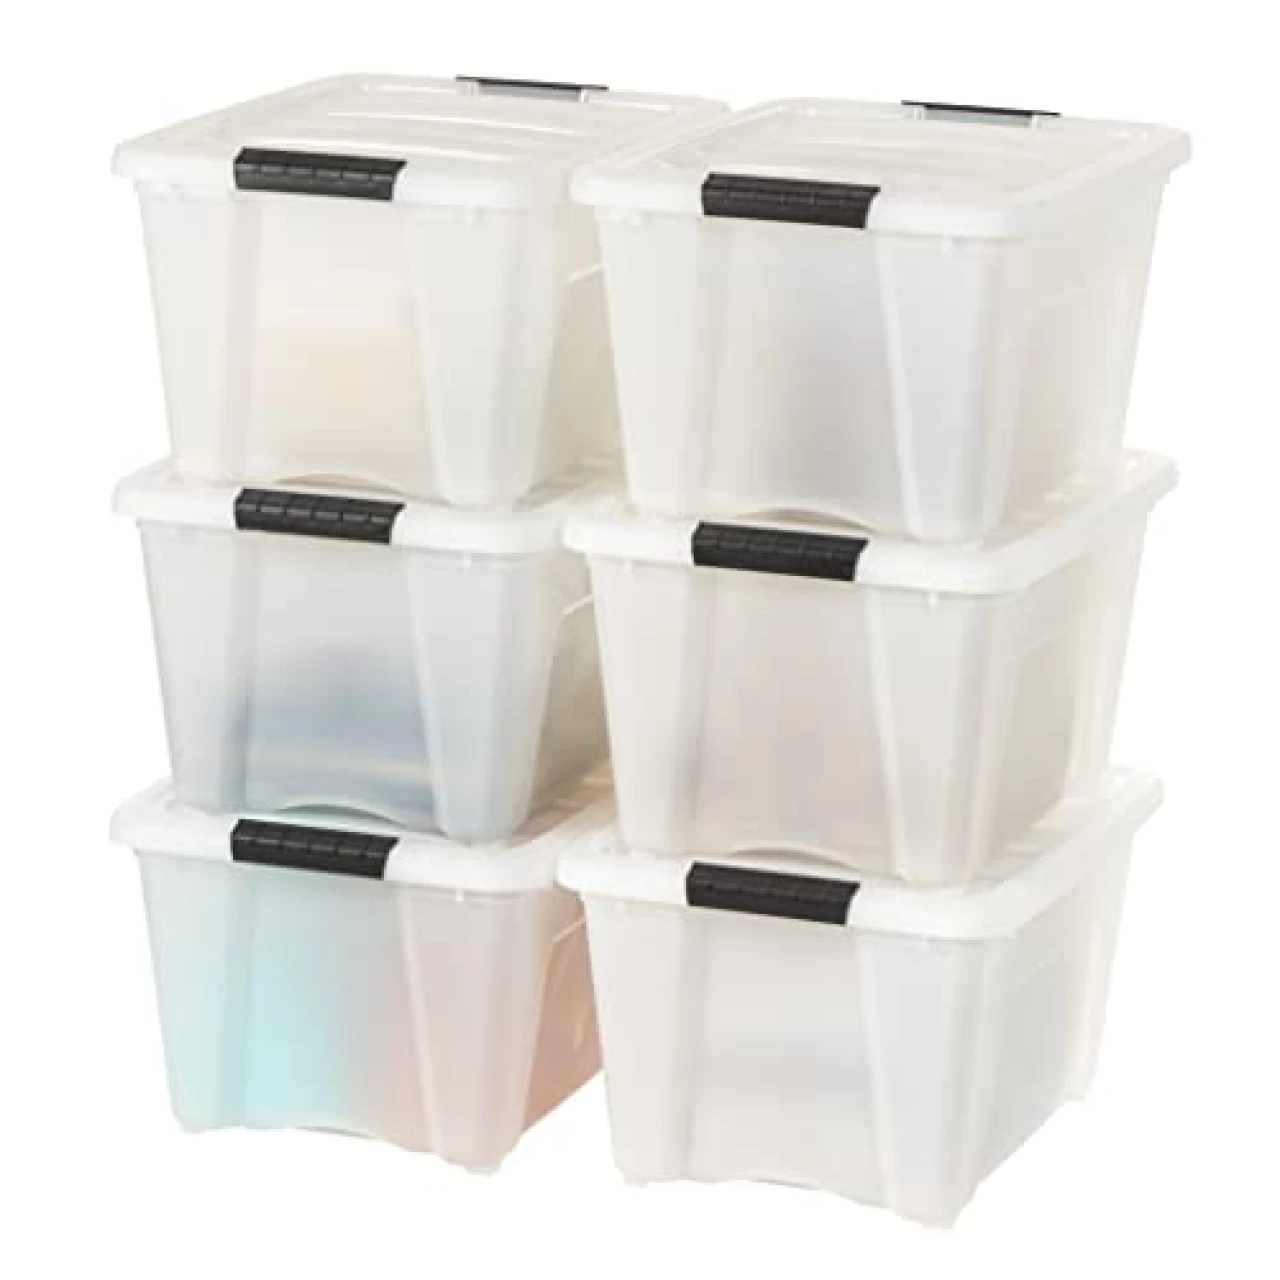 IRIS USA 6 Pack 32qt Plastic Storage Bin with Lid and Secure Latching Buckles, Pearl